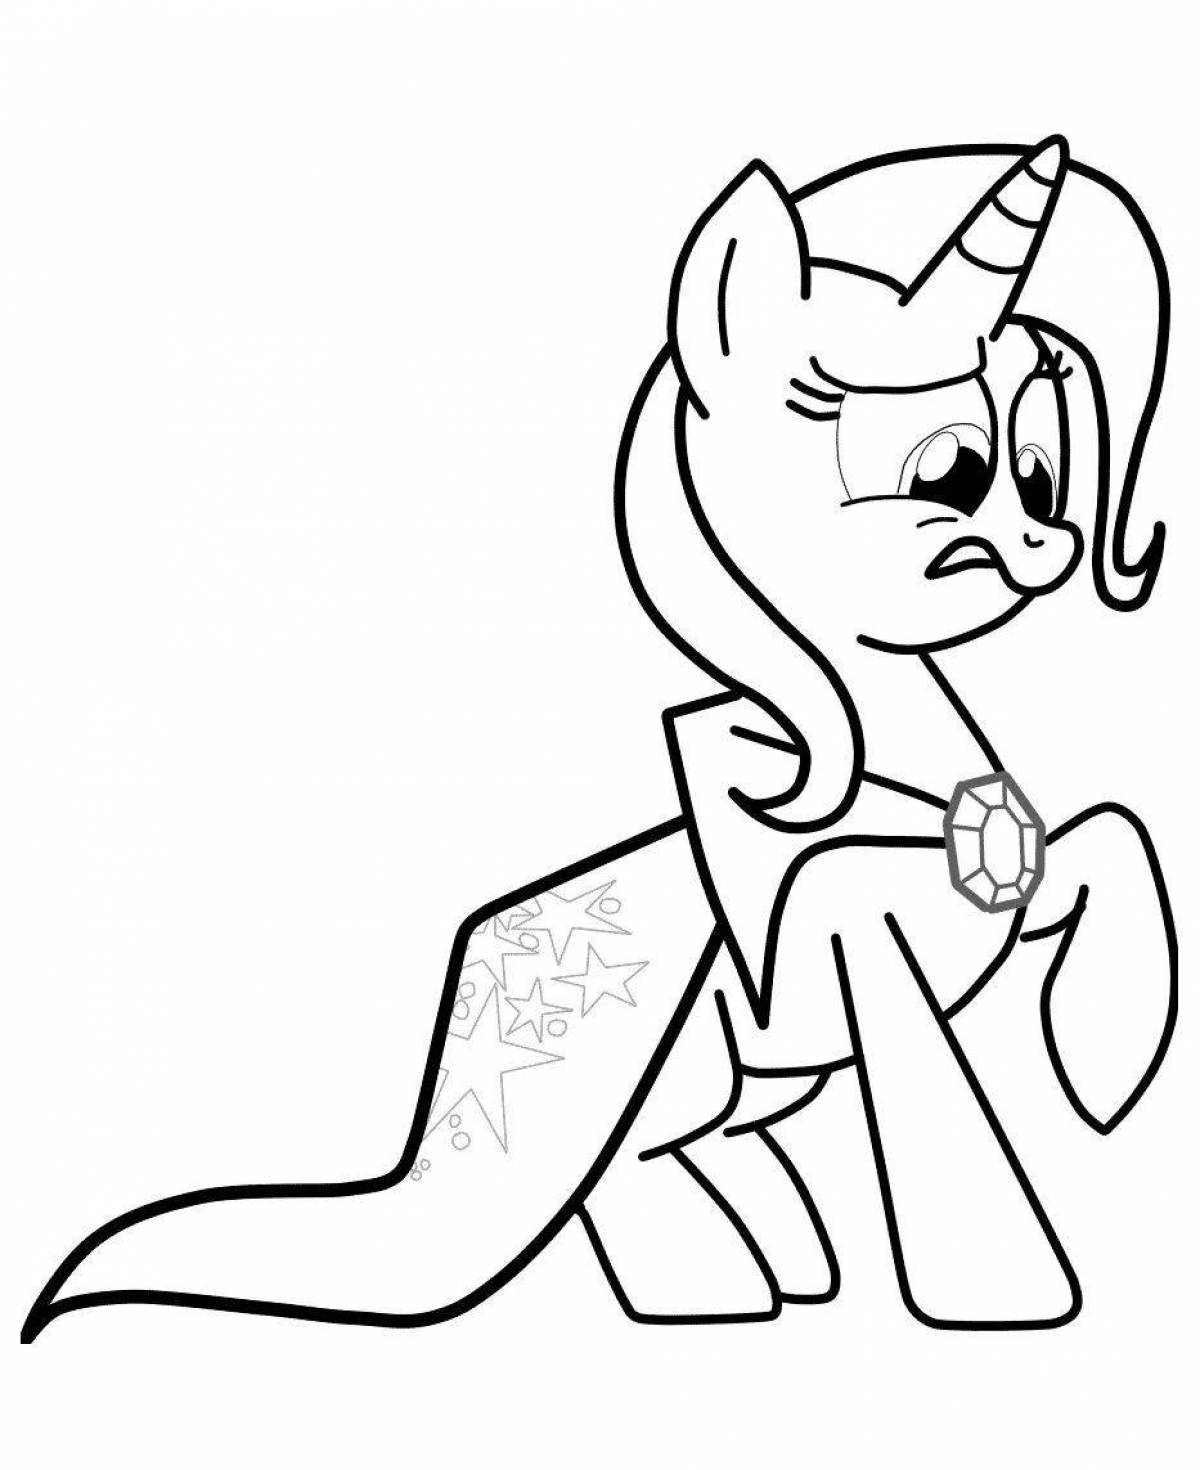 Coloring page dazzling trixie pony